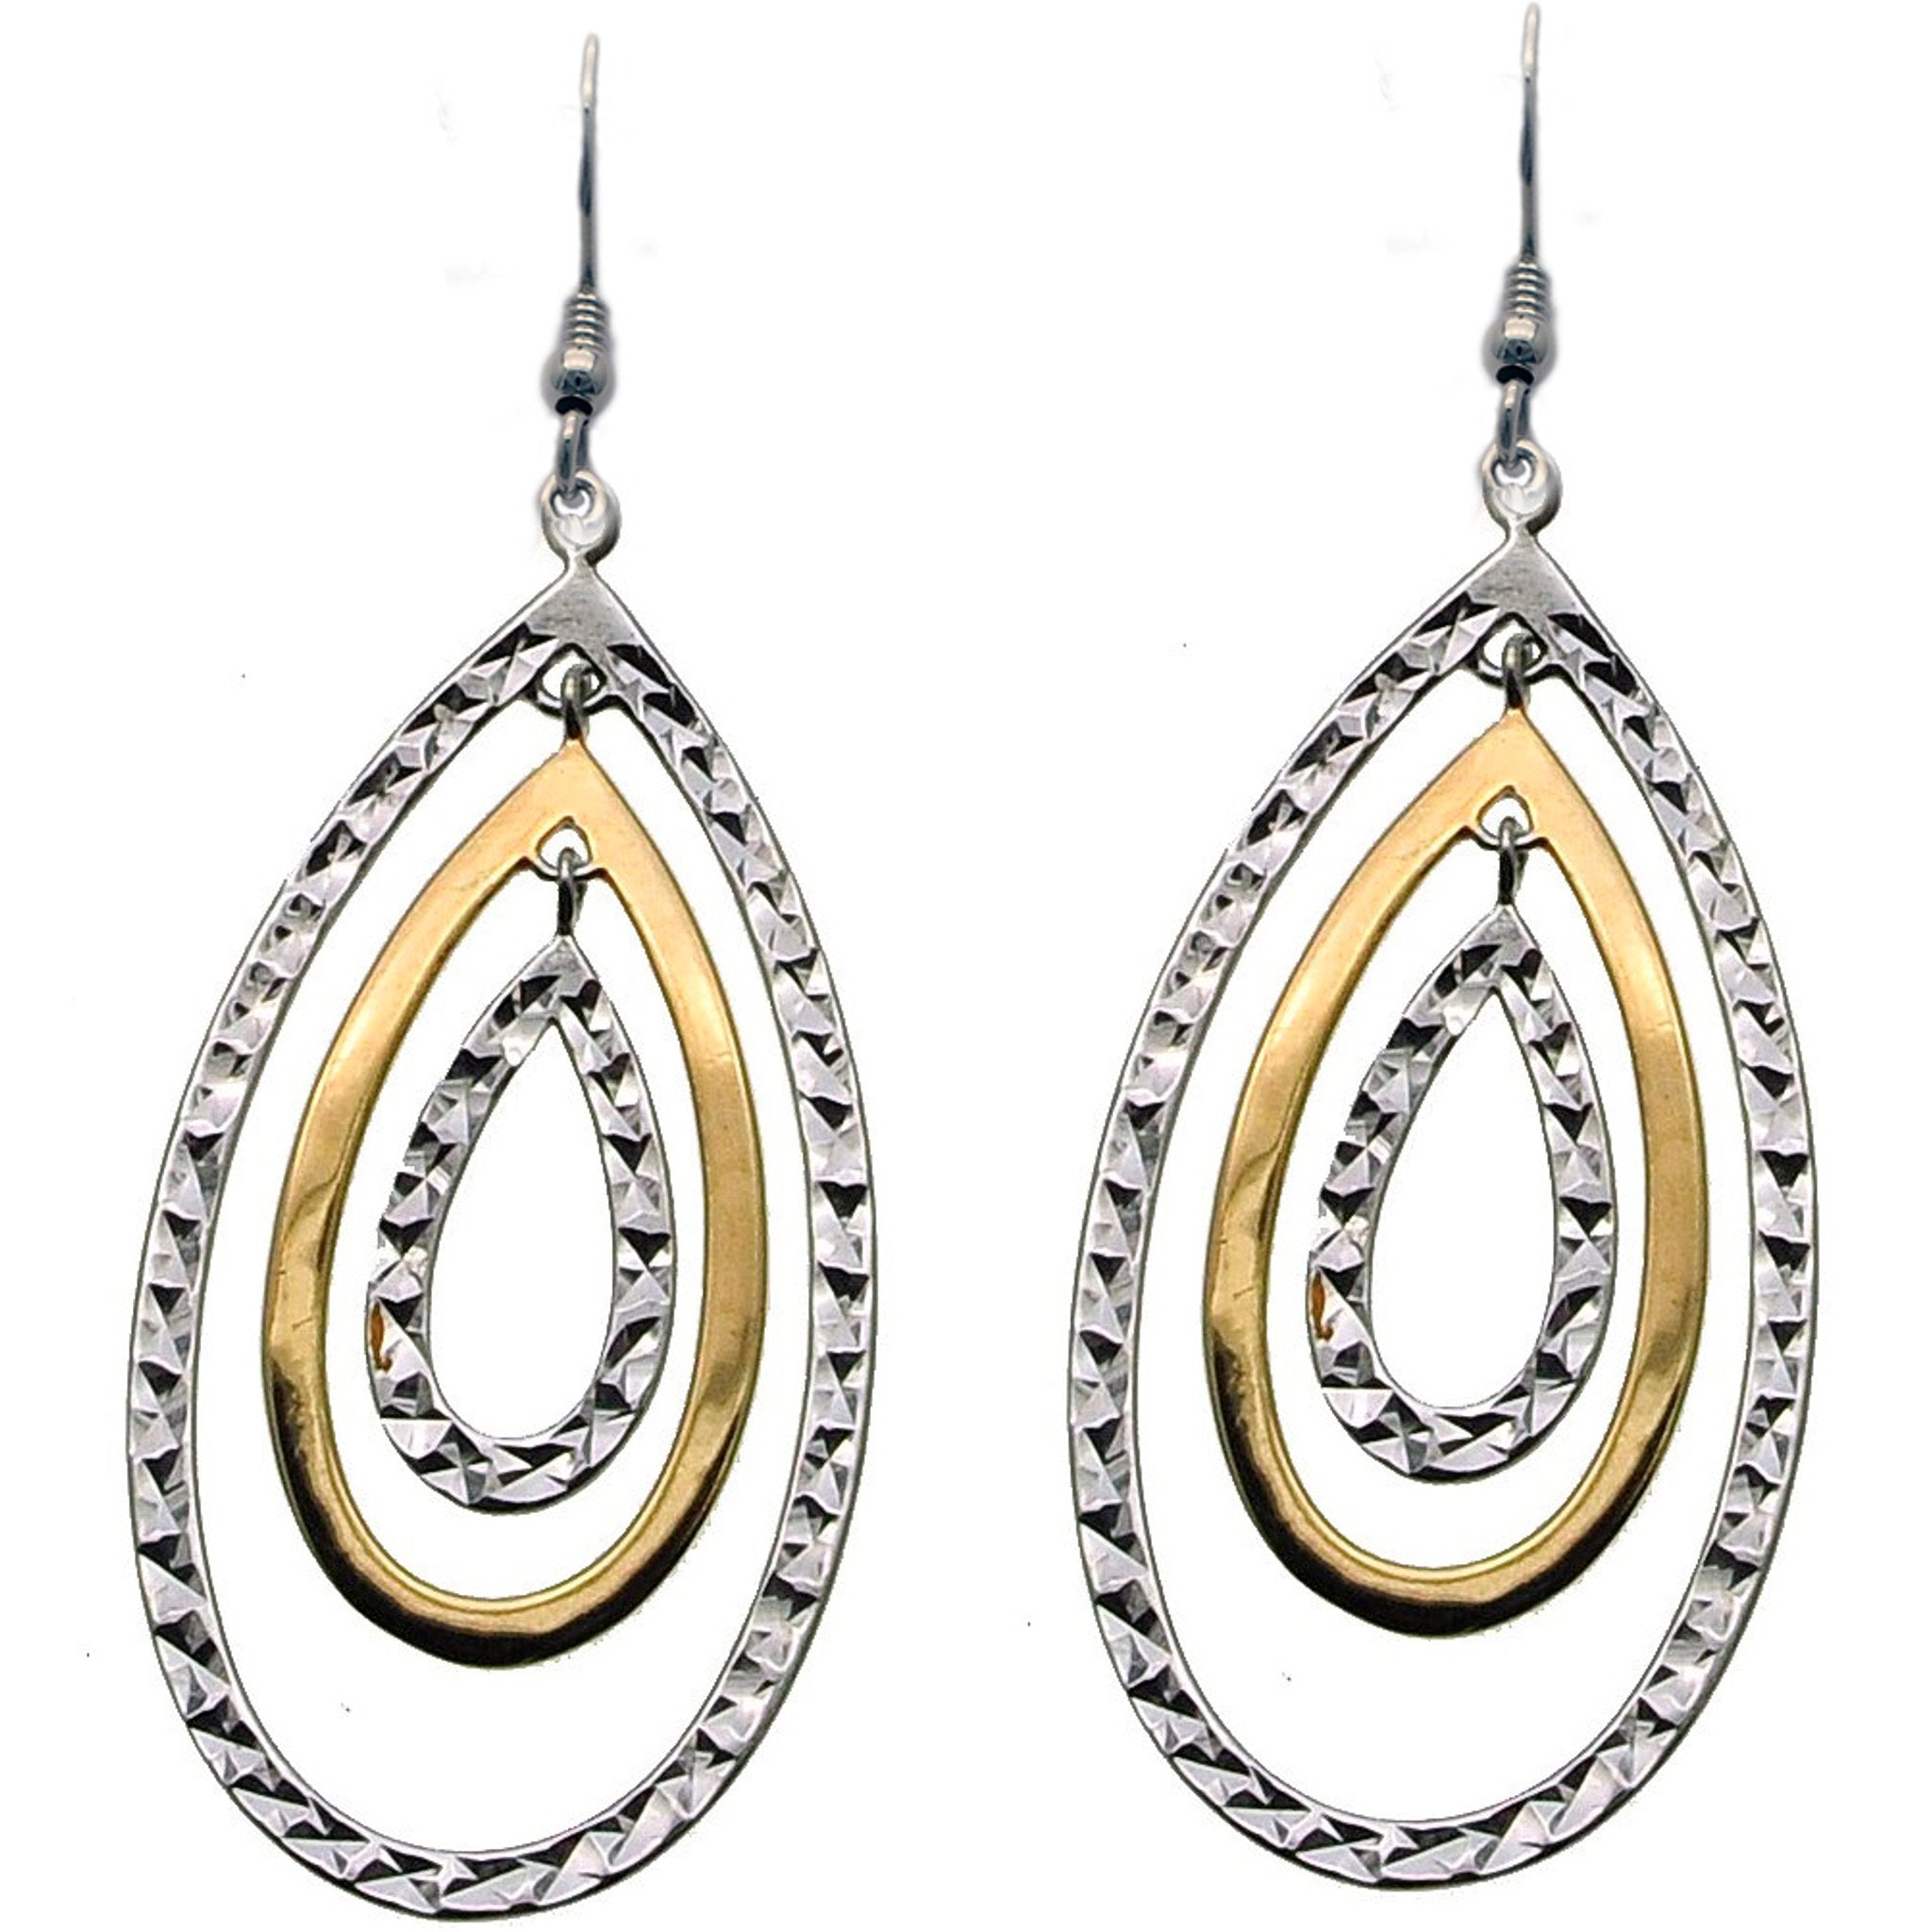 Sleek and Contemporary Silver and Gold Earrings